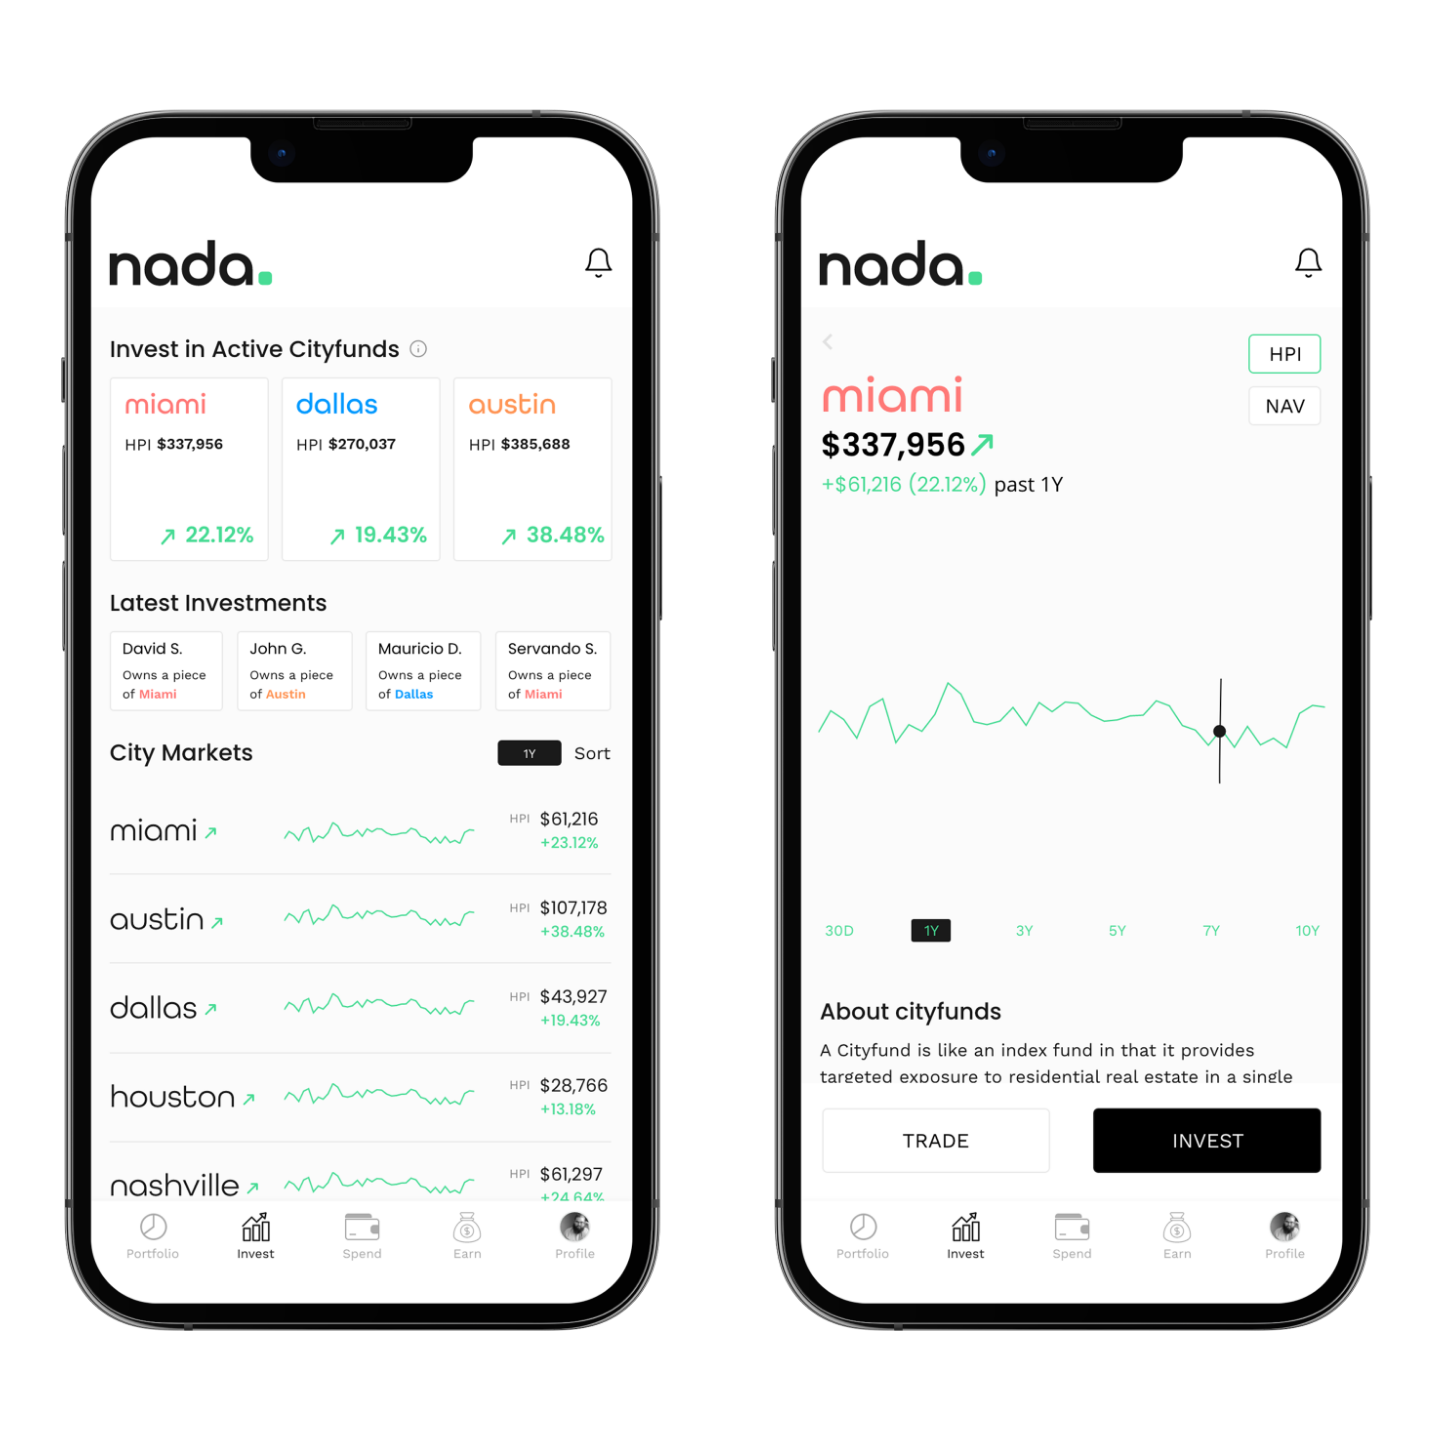 Images of Nada's yet to be released mobile investment app